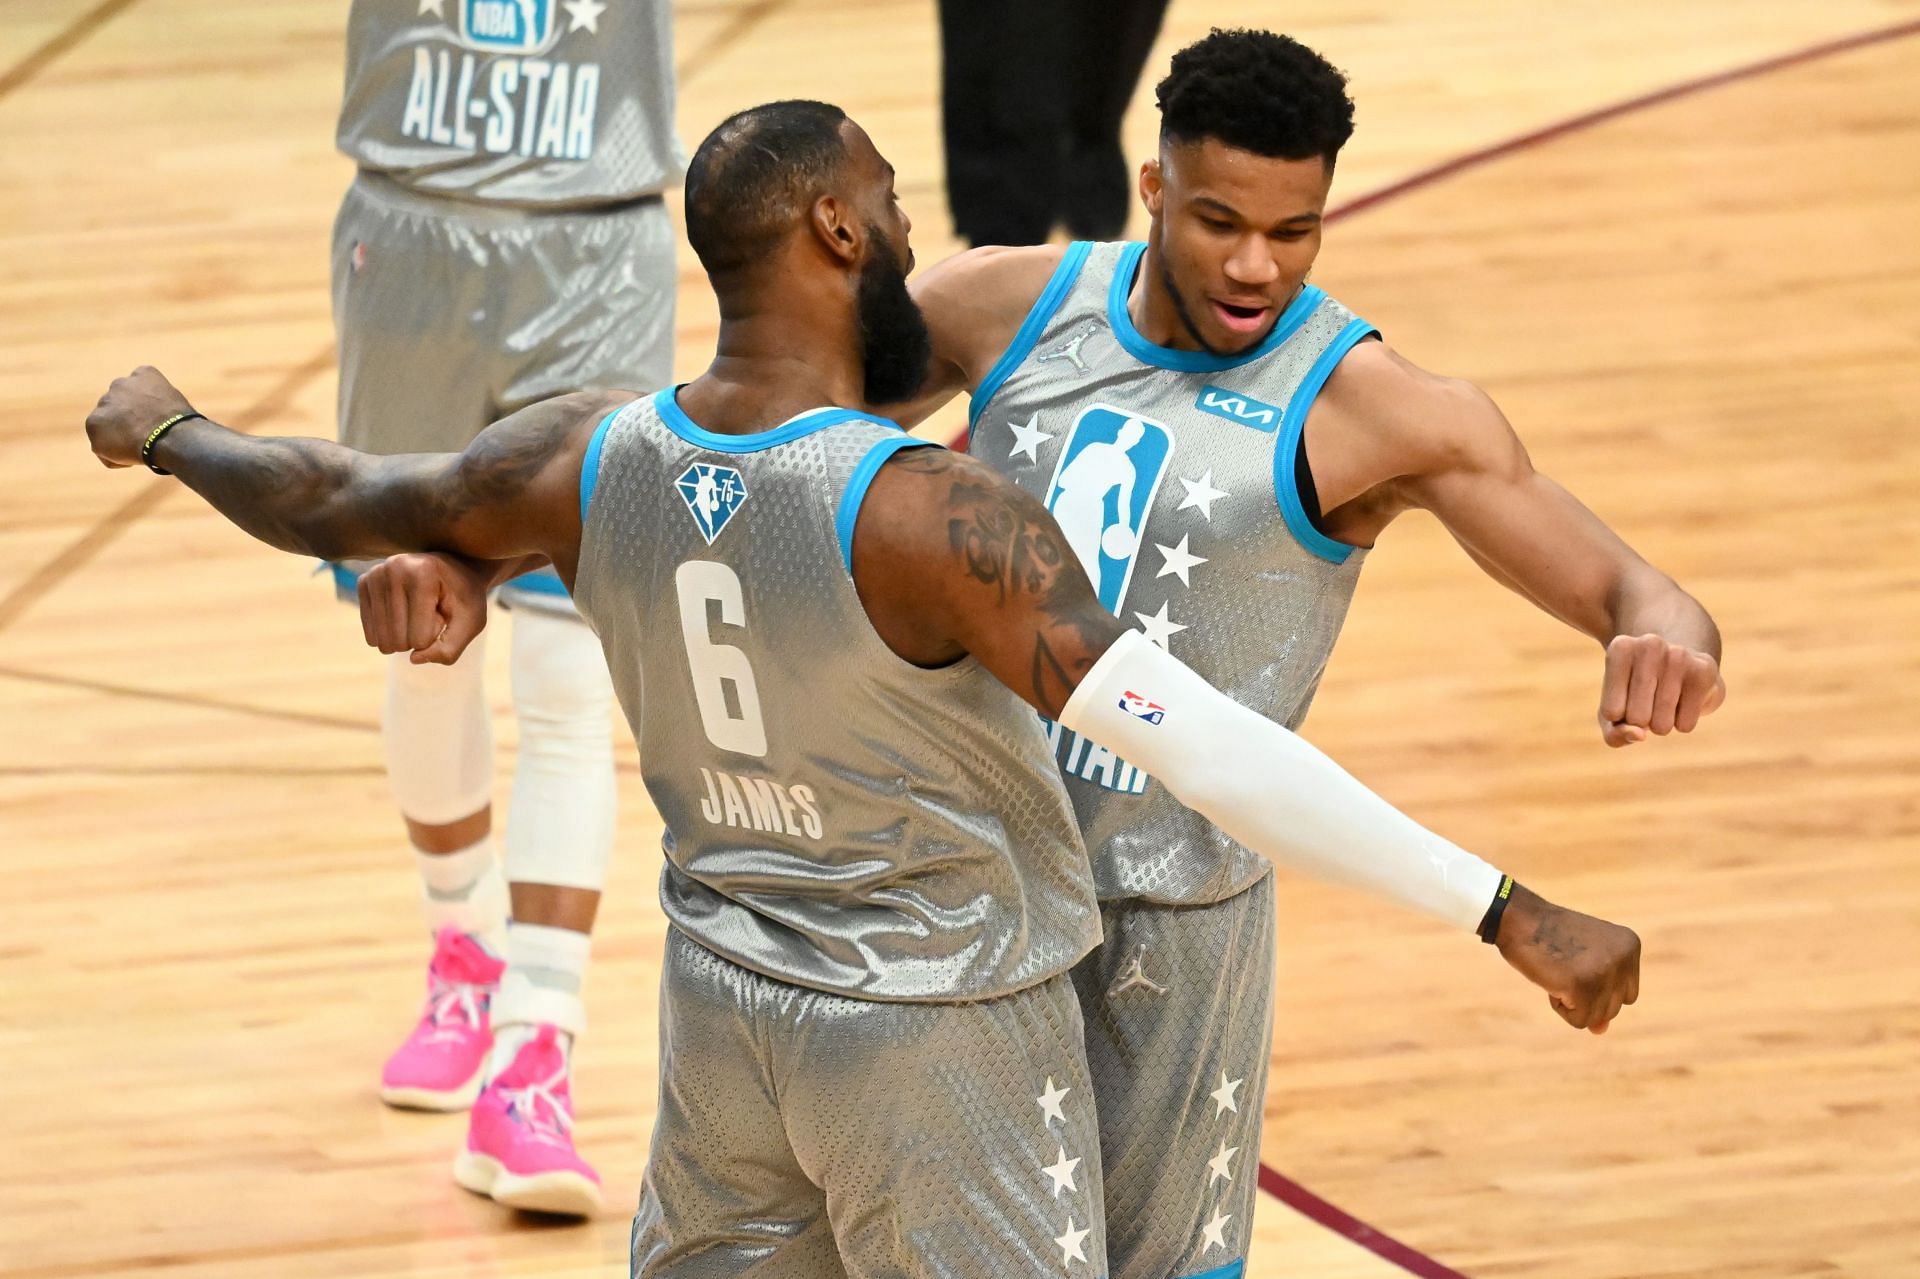 LeBron James and Giannis Antetokounmpo of Team LeBron celebrate after defeating Team Durant 163-160 at the NBA All-Star Game at Rocket Mortgage Fieldhouse on Sunday in Cleveland, Ohio.